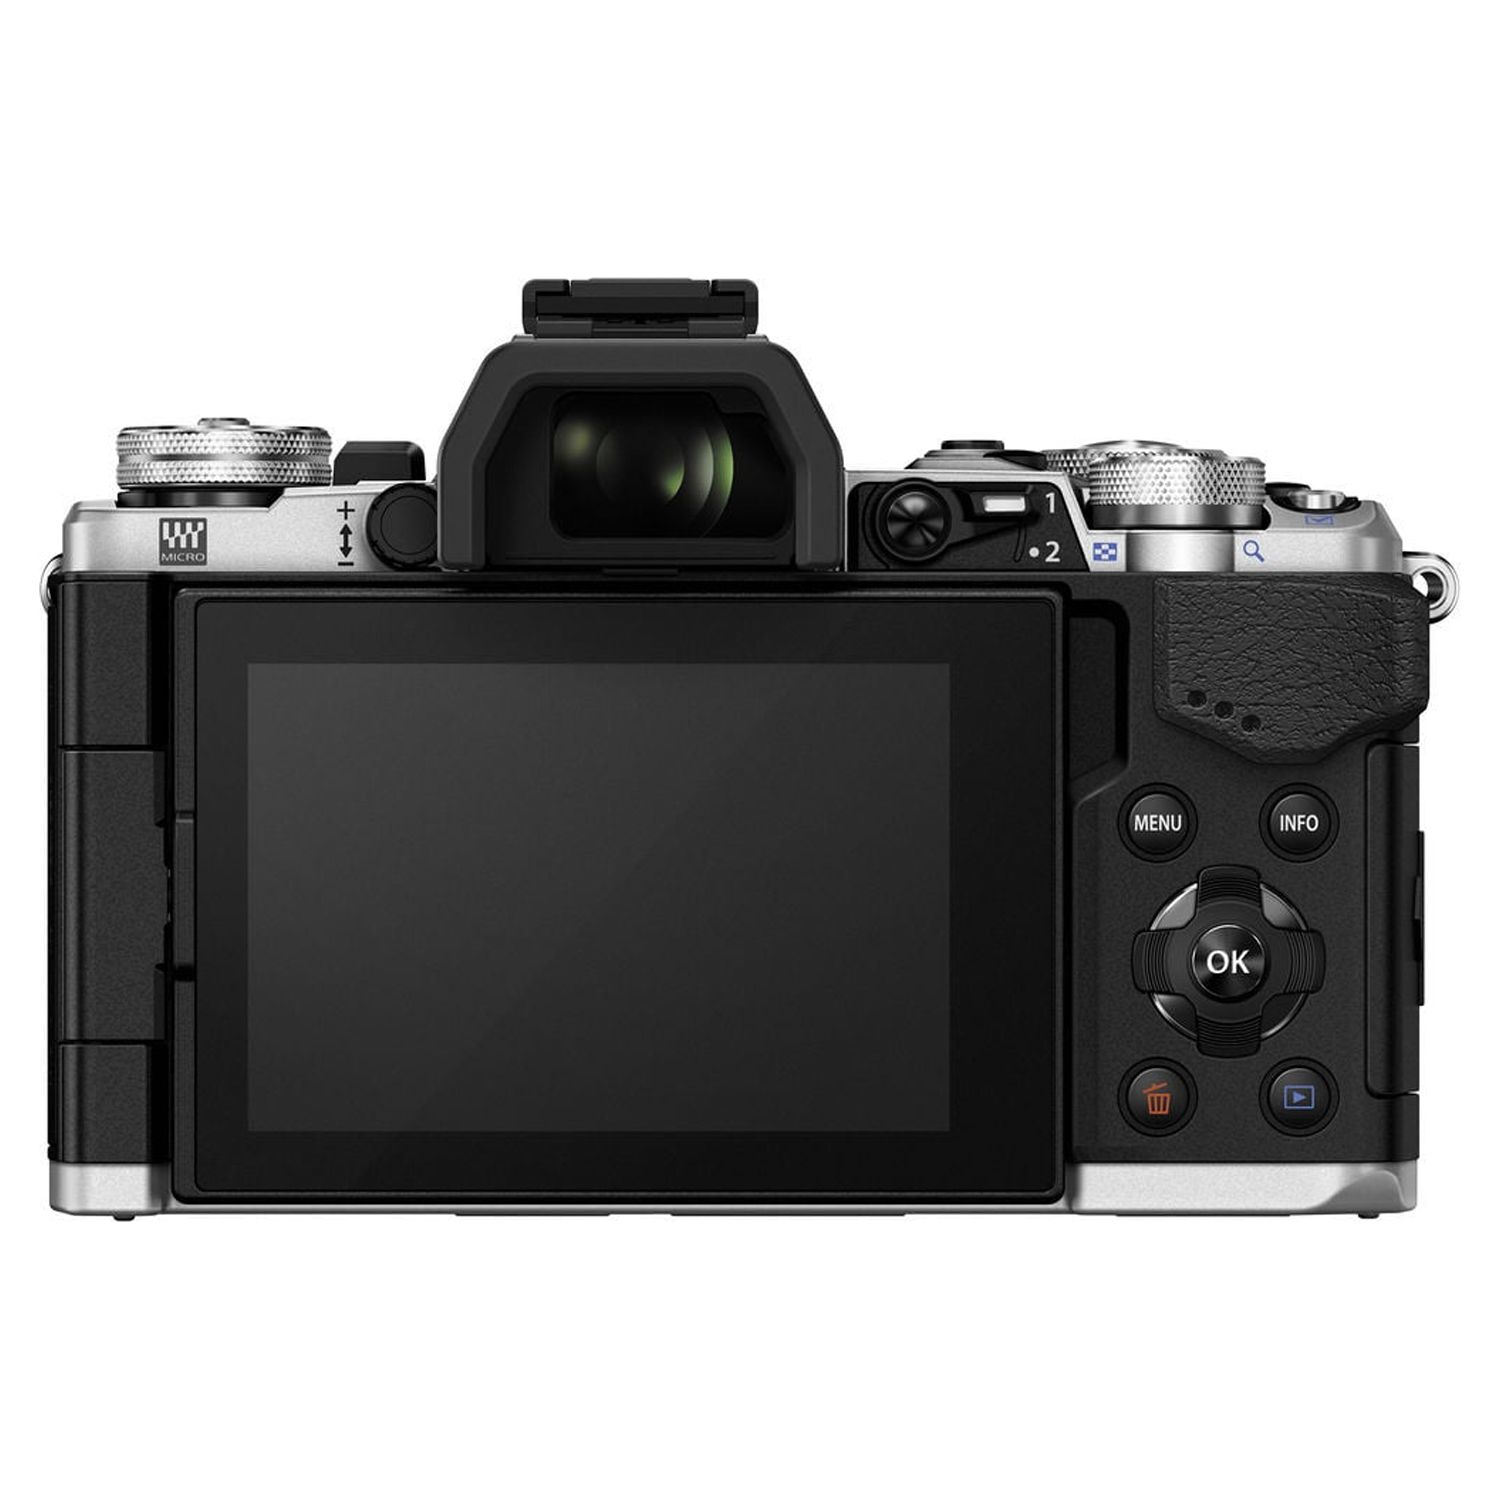 Olympus OM-D E-M5 Mark II Mirrorless Camera (Body Only), Silver - image 2 of 4